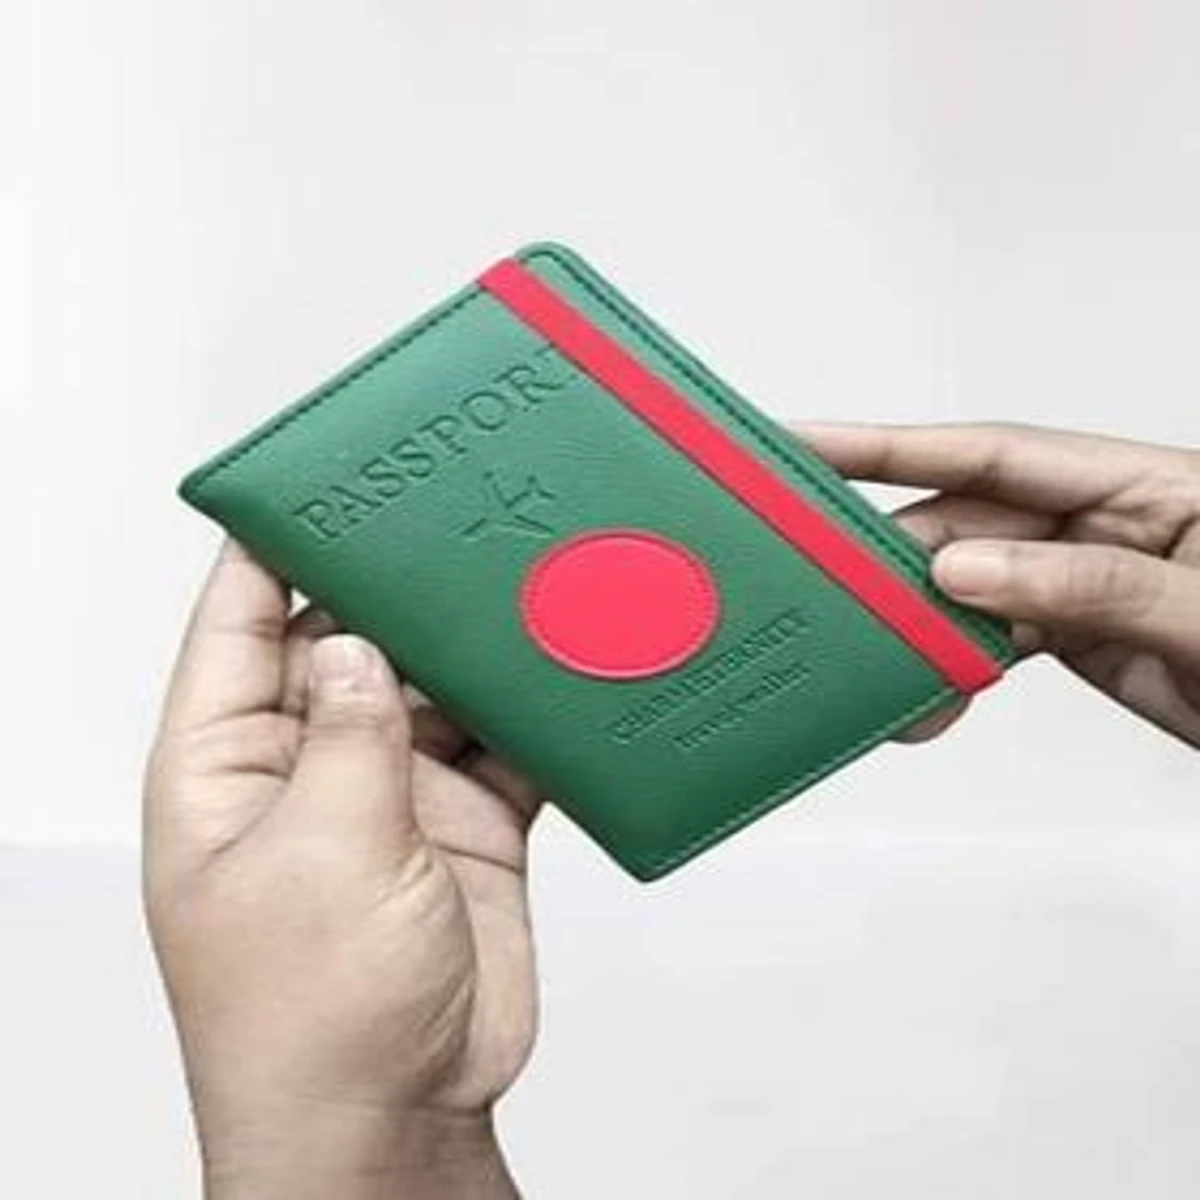 Elastic Band Artificial Leather Passport Cover RFID Blocking For Cards Travel Bangladesh Passport Holder Wallet.